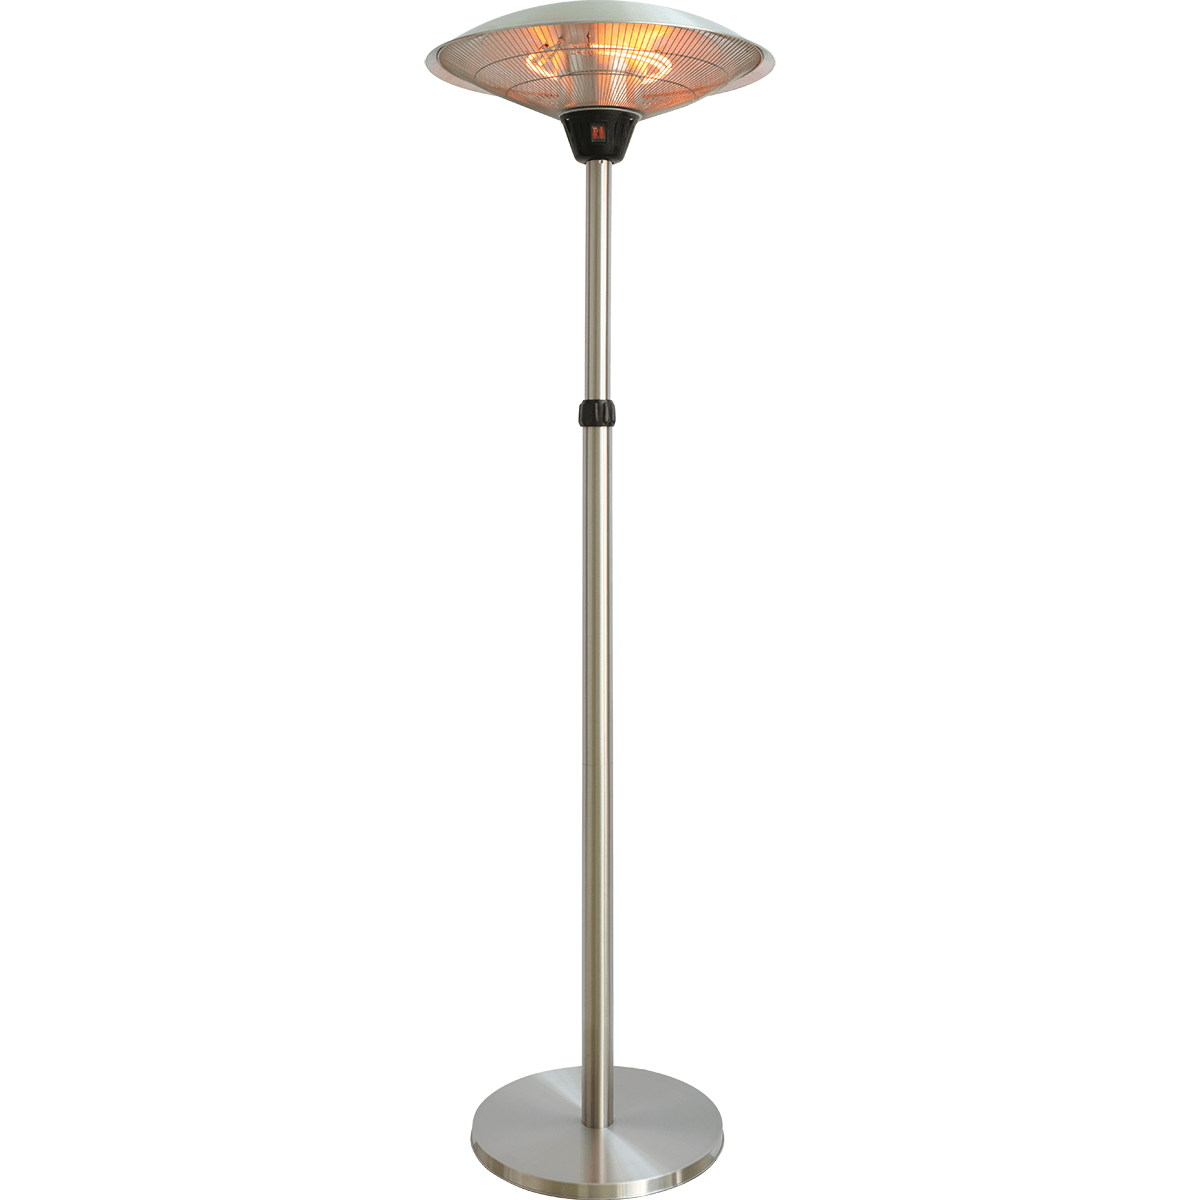 Ener-G+ Pole Mounted Freestanding Infrared Outdoor Heater